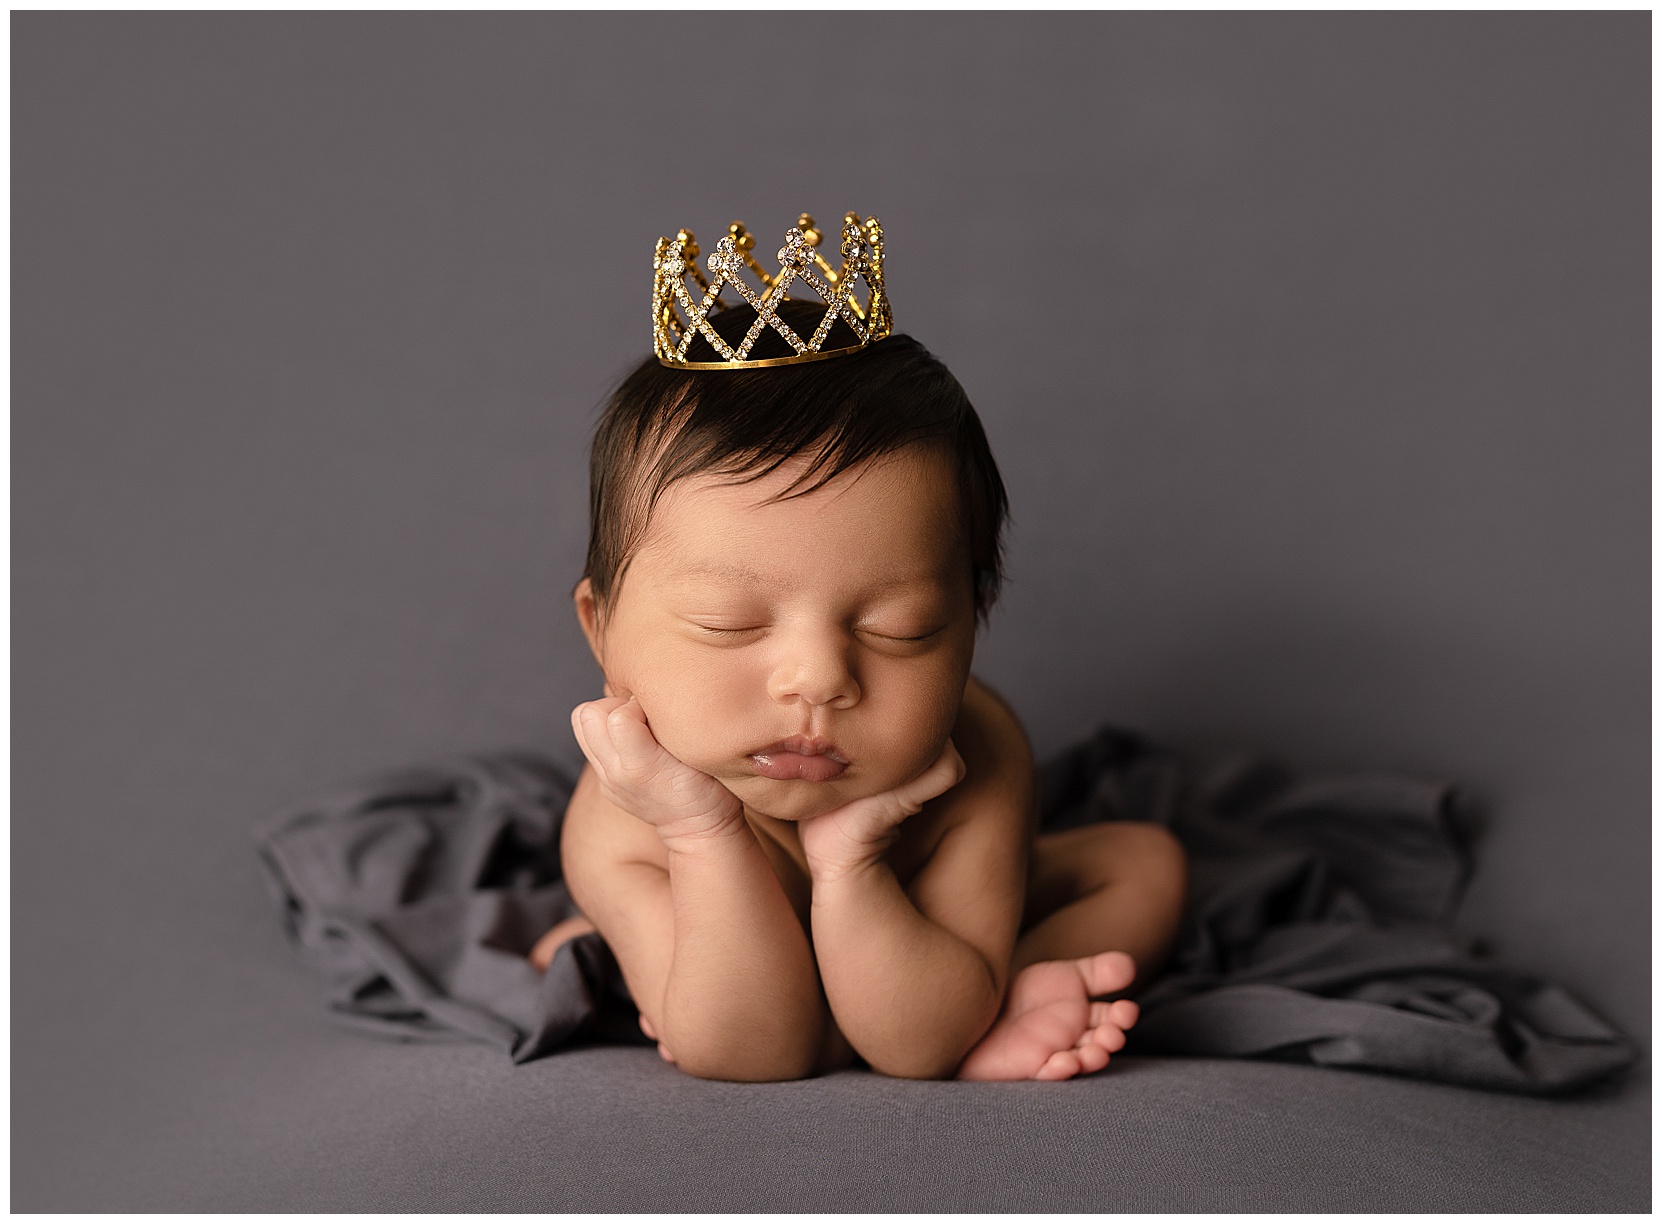 Newborn photo featuring a baby girl on a gray background. She is posed in the froggy pose with a small crown on her head.